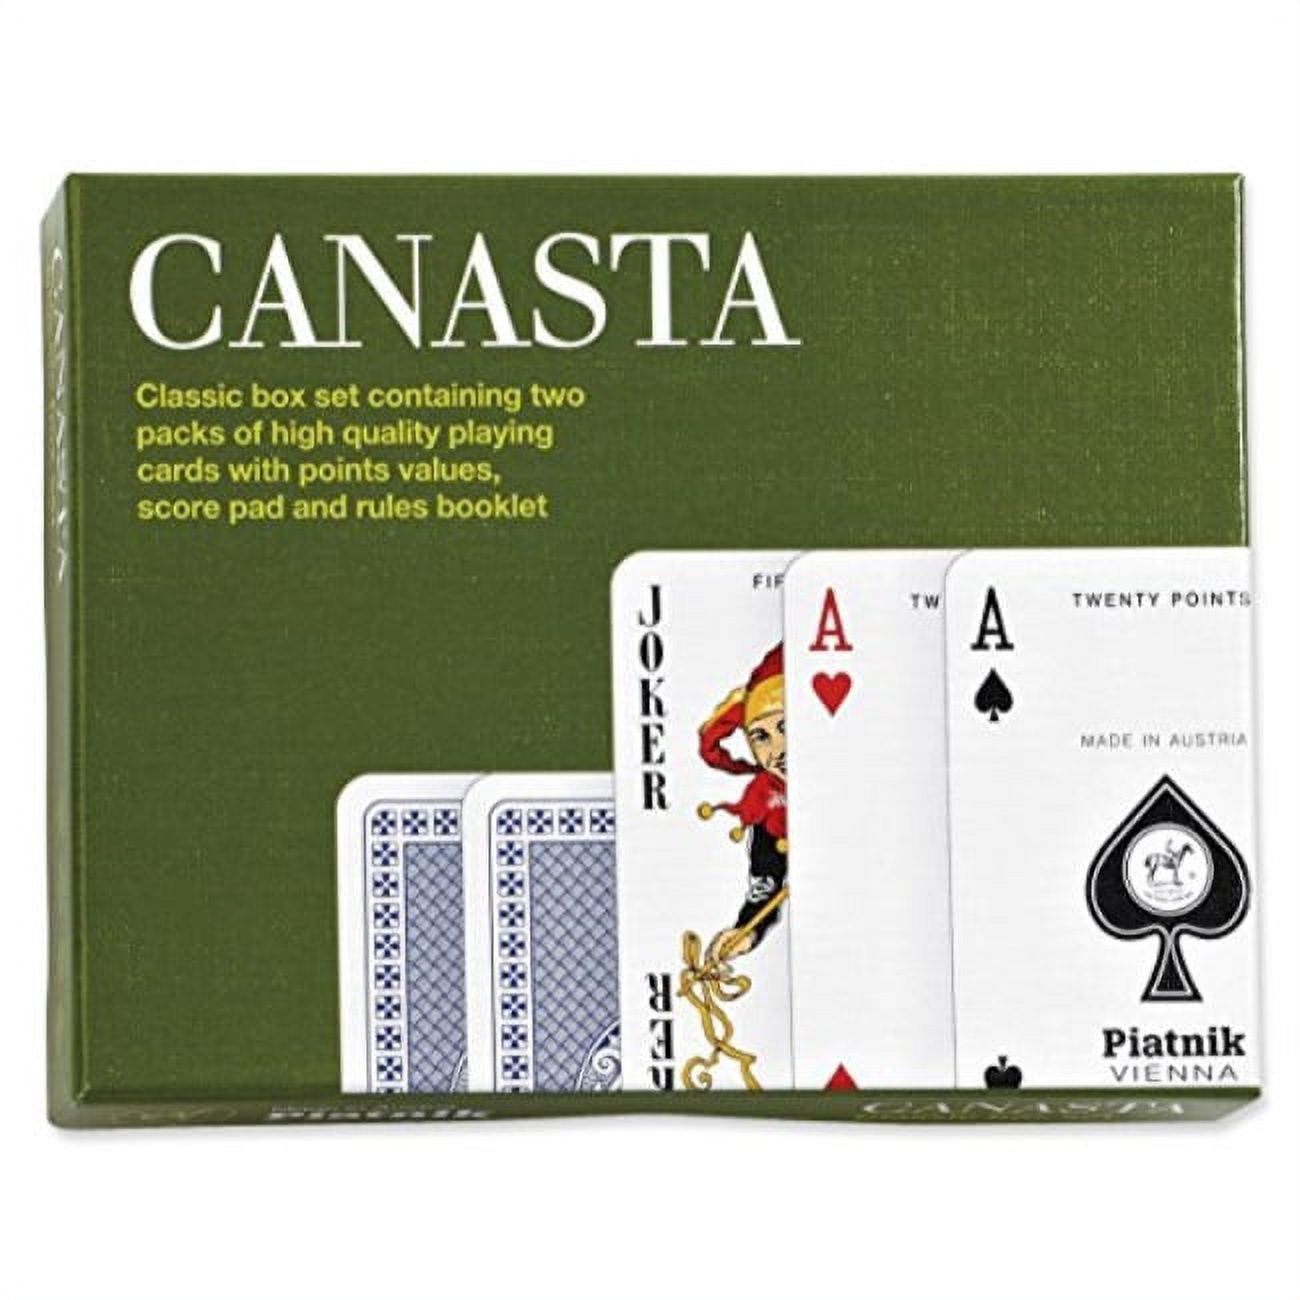 canasta card game - image 1 of 2